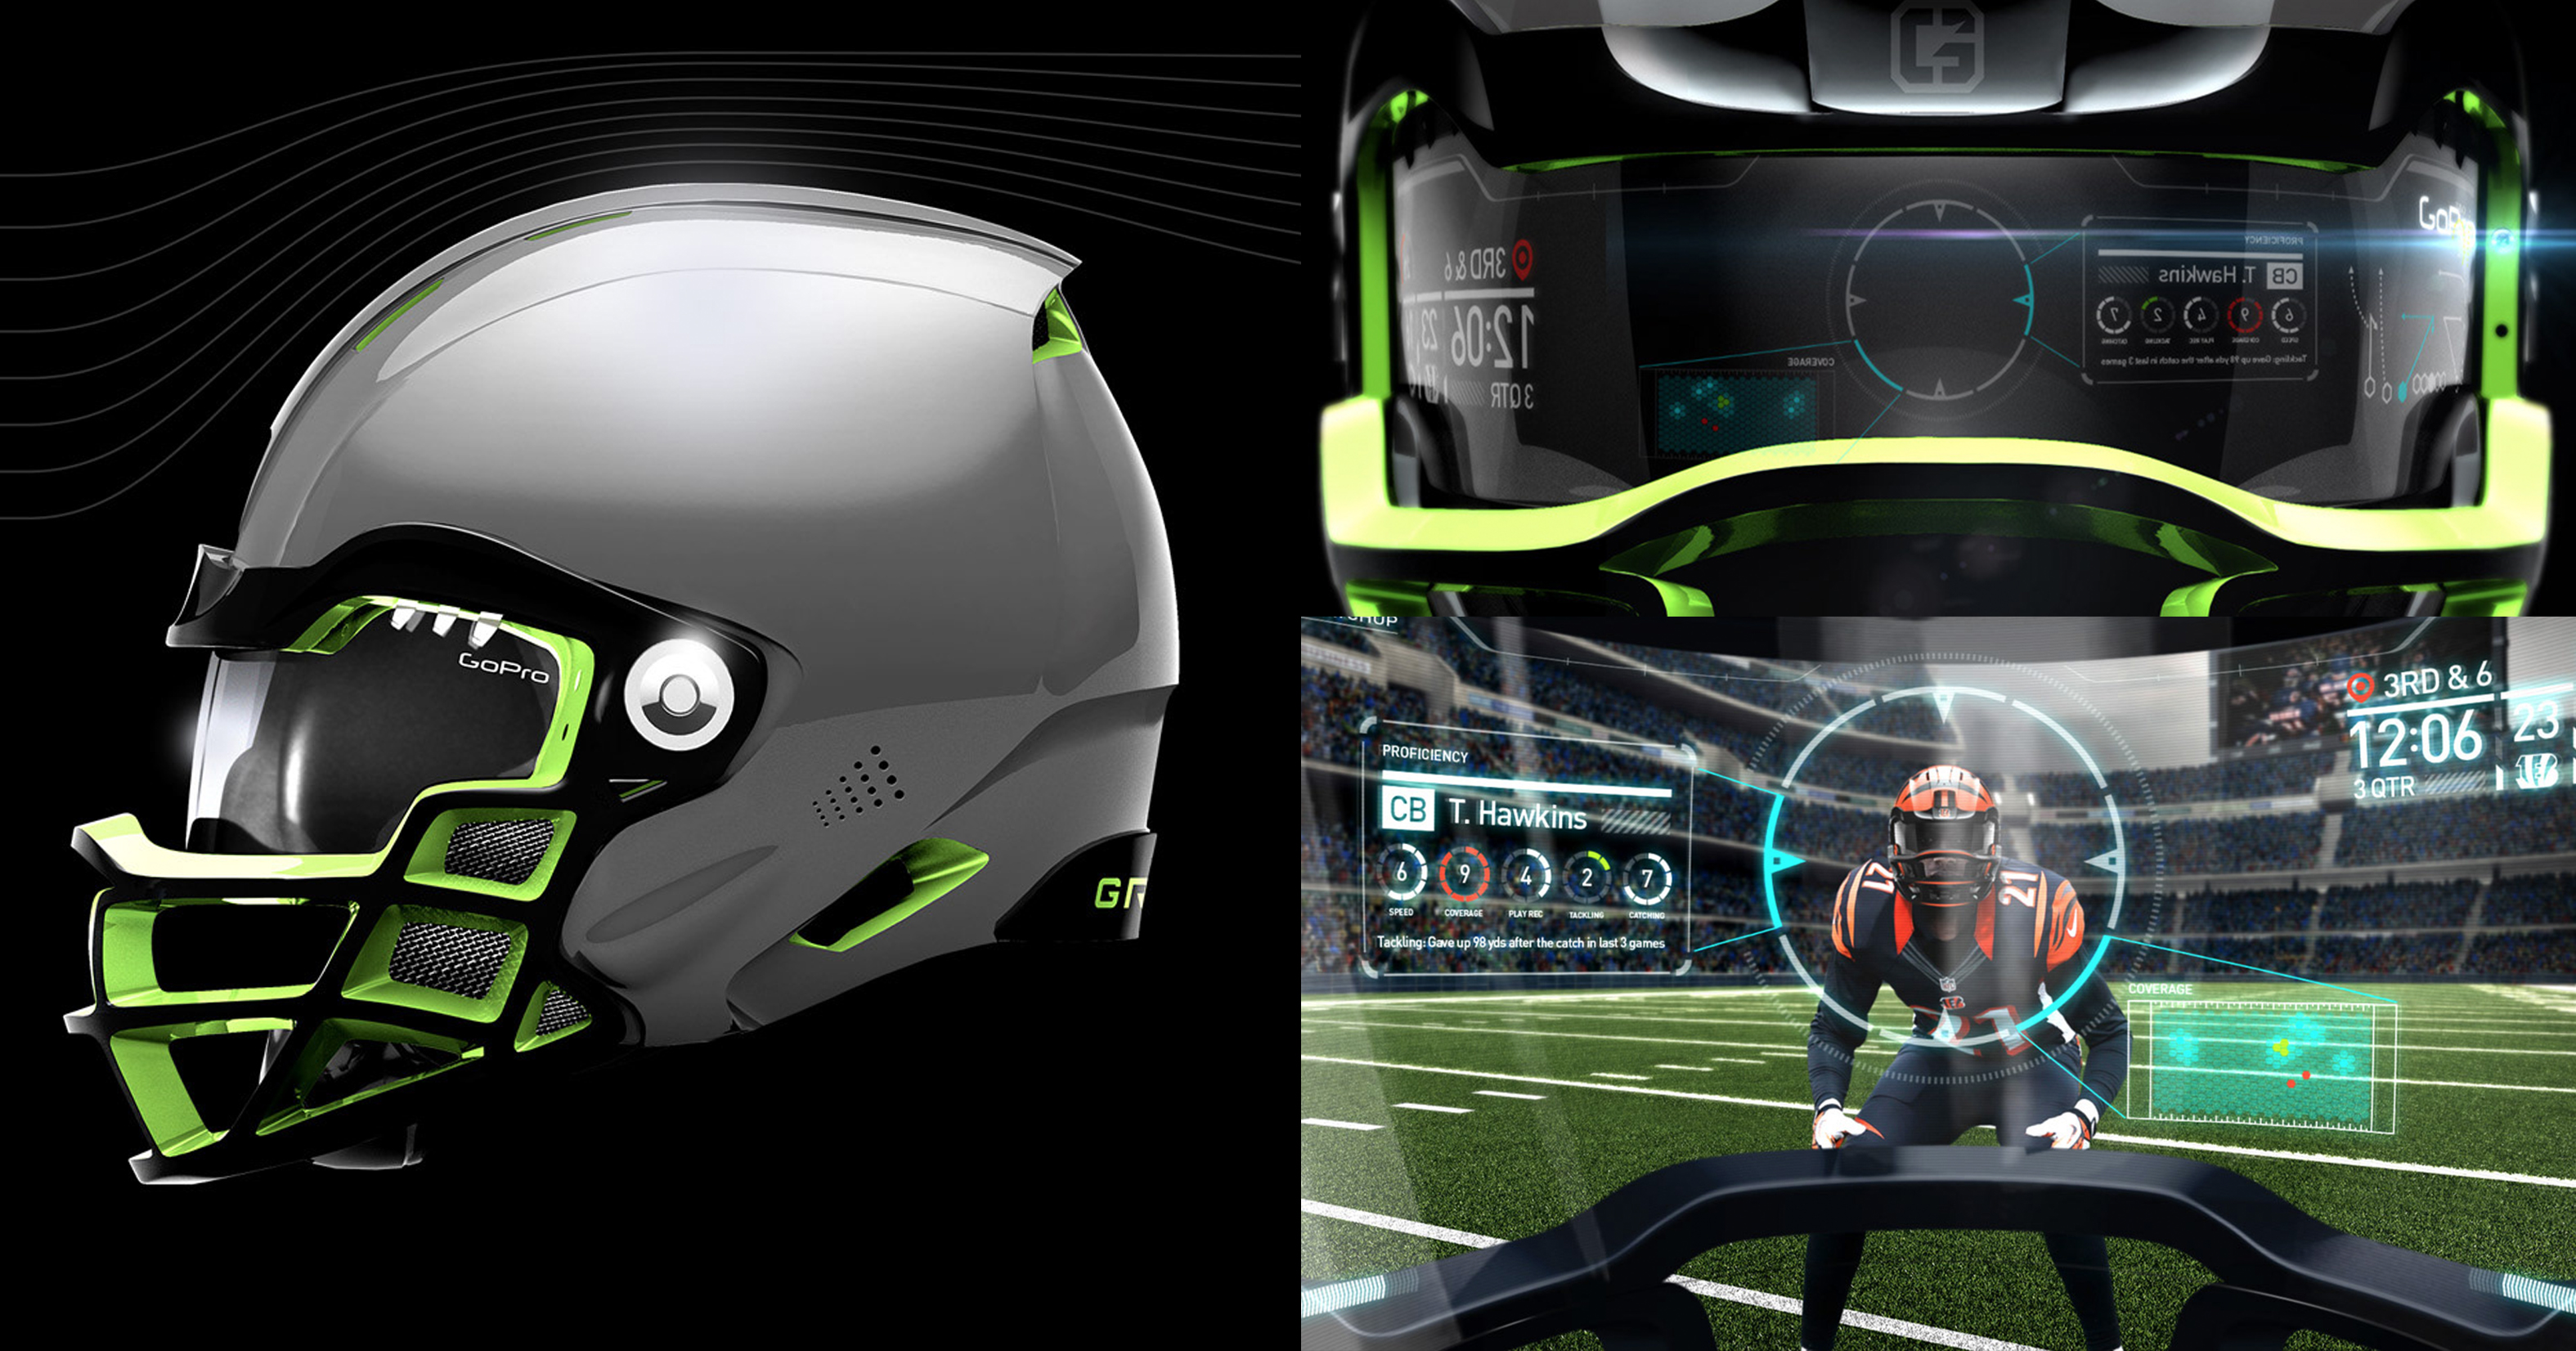 Video Shows Glimpse Of What Football Helmets Of The Future Will Look